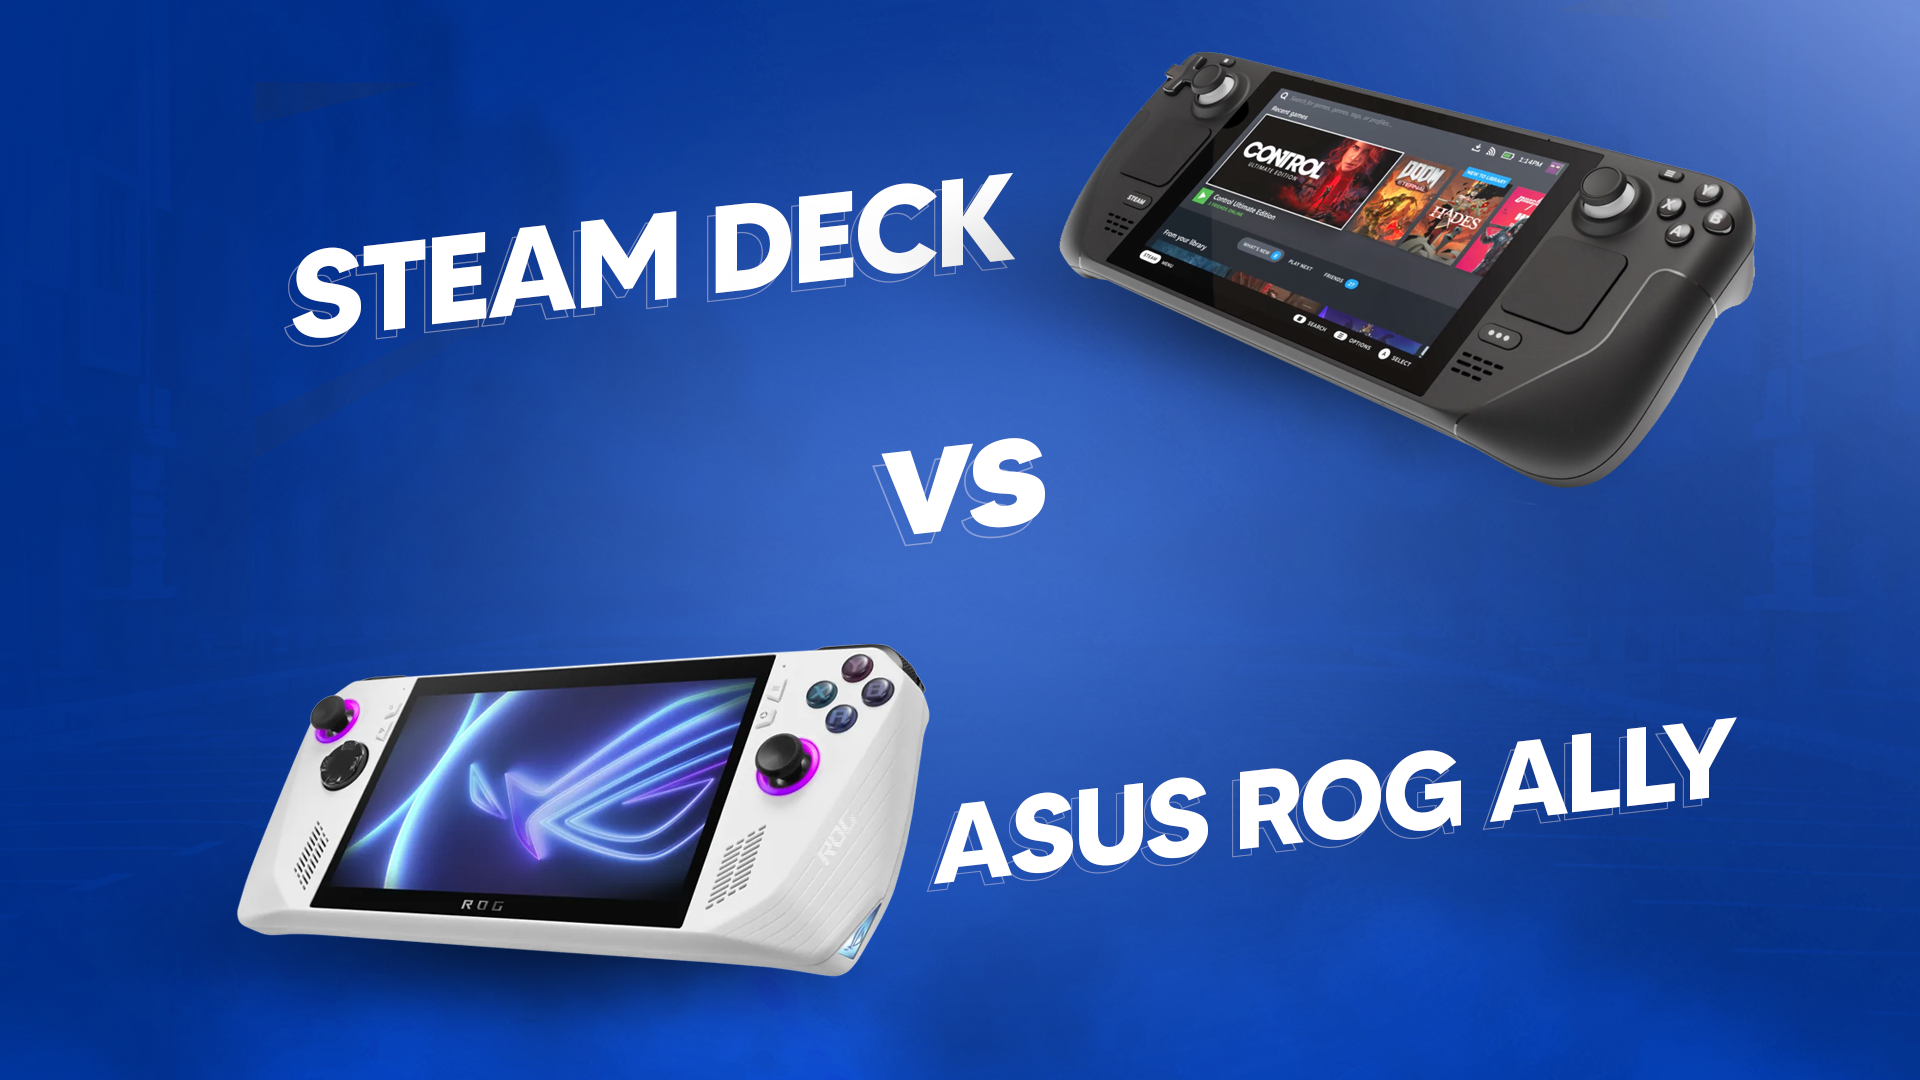 Steam Deck vs Asus ROG Ally: Which is the better handheld gaming PC?